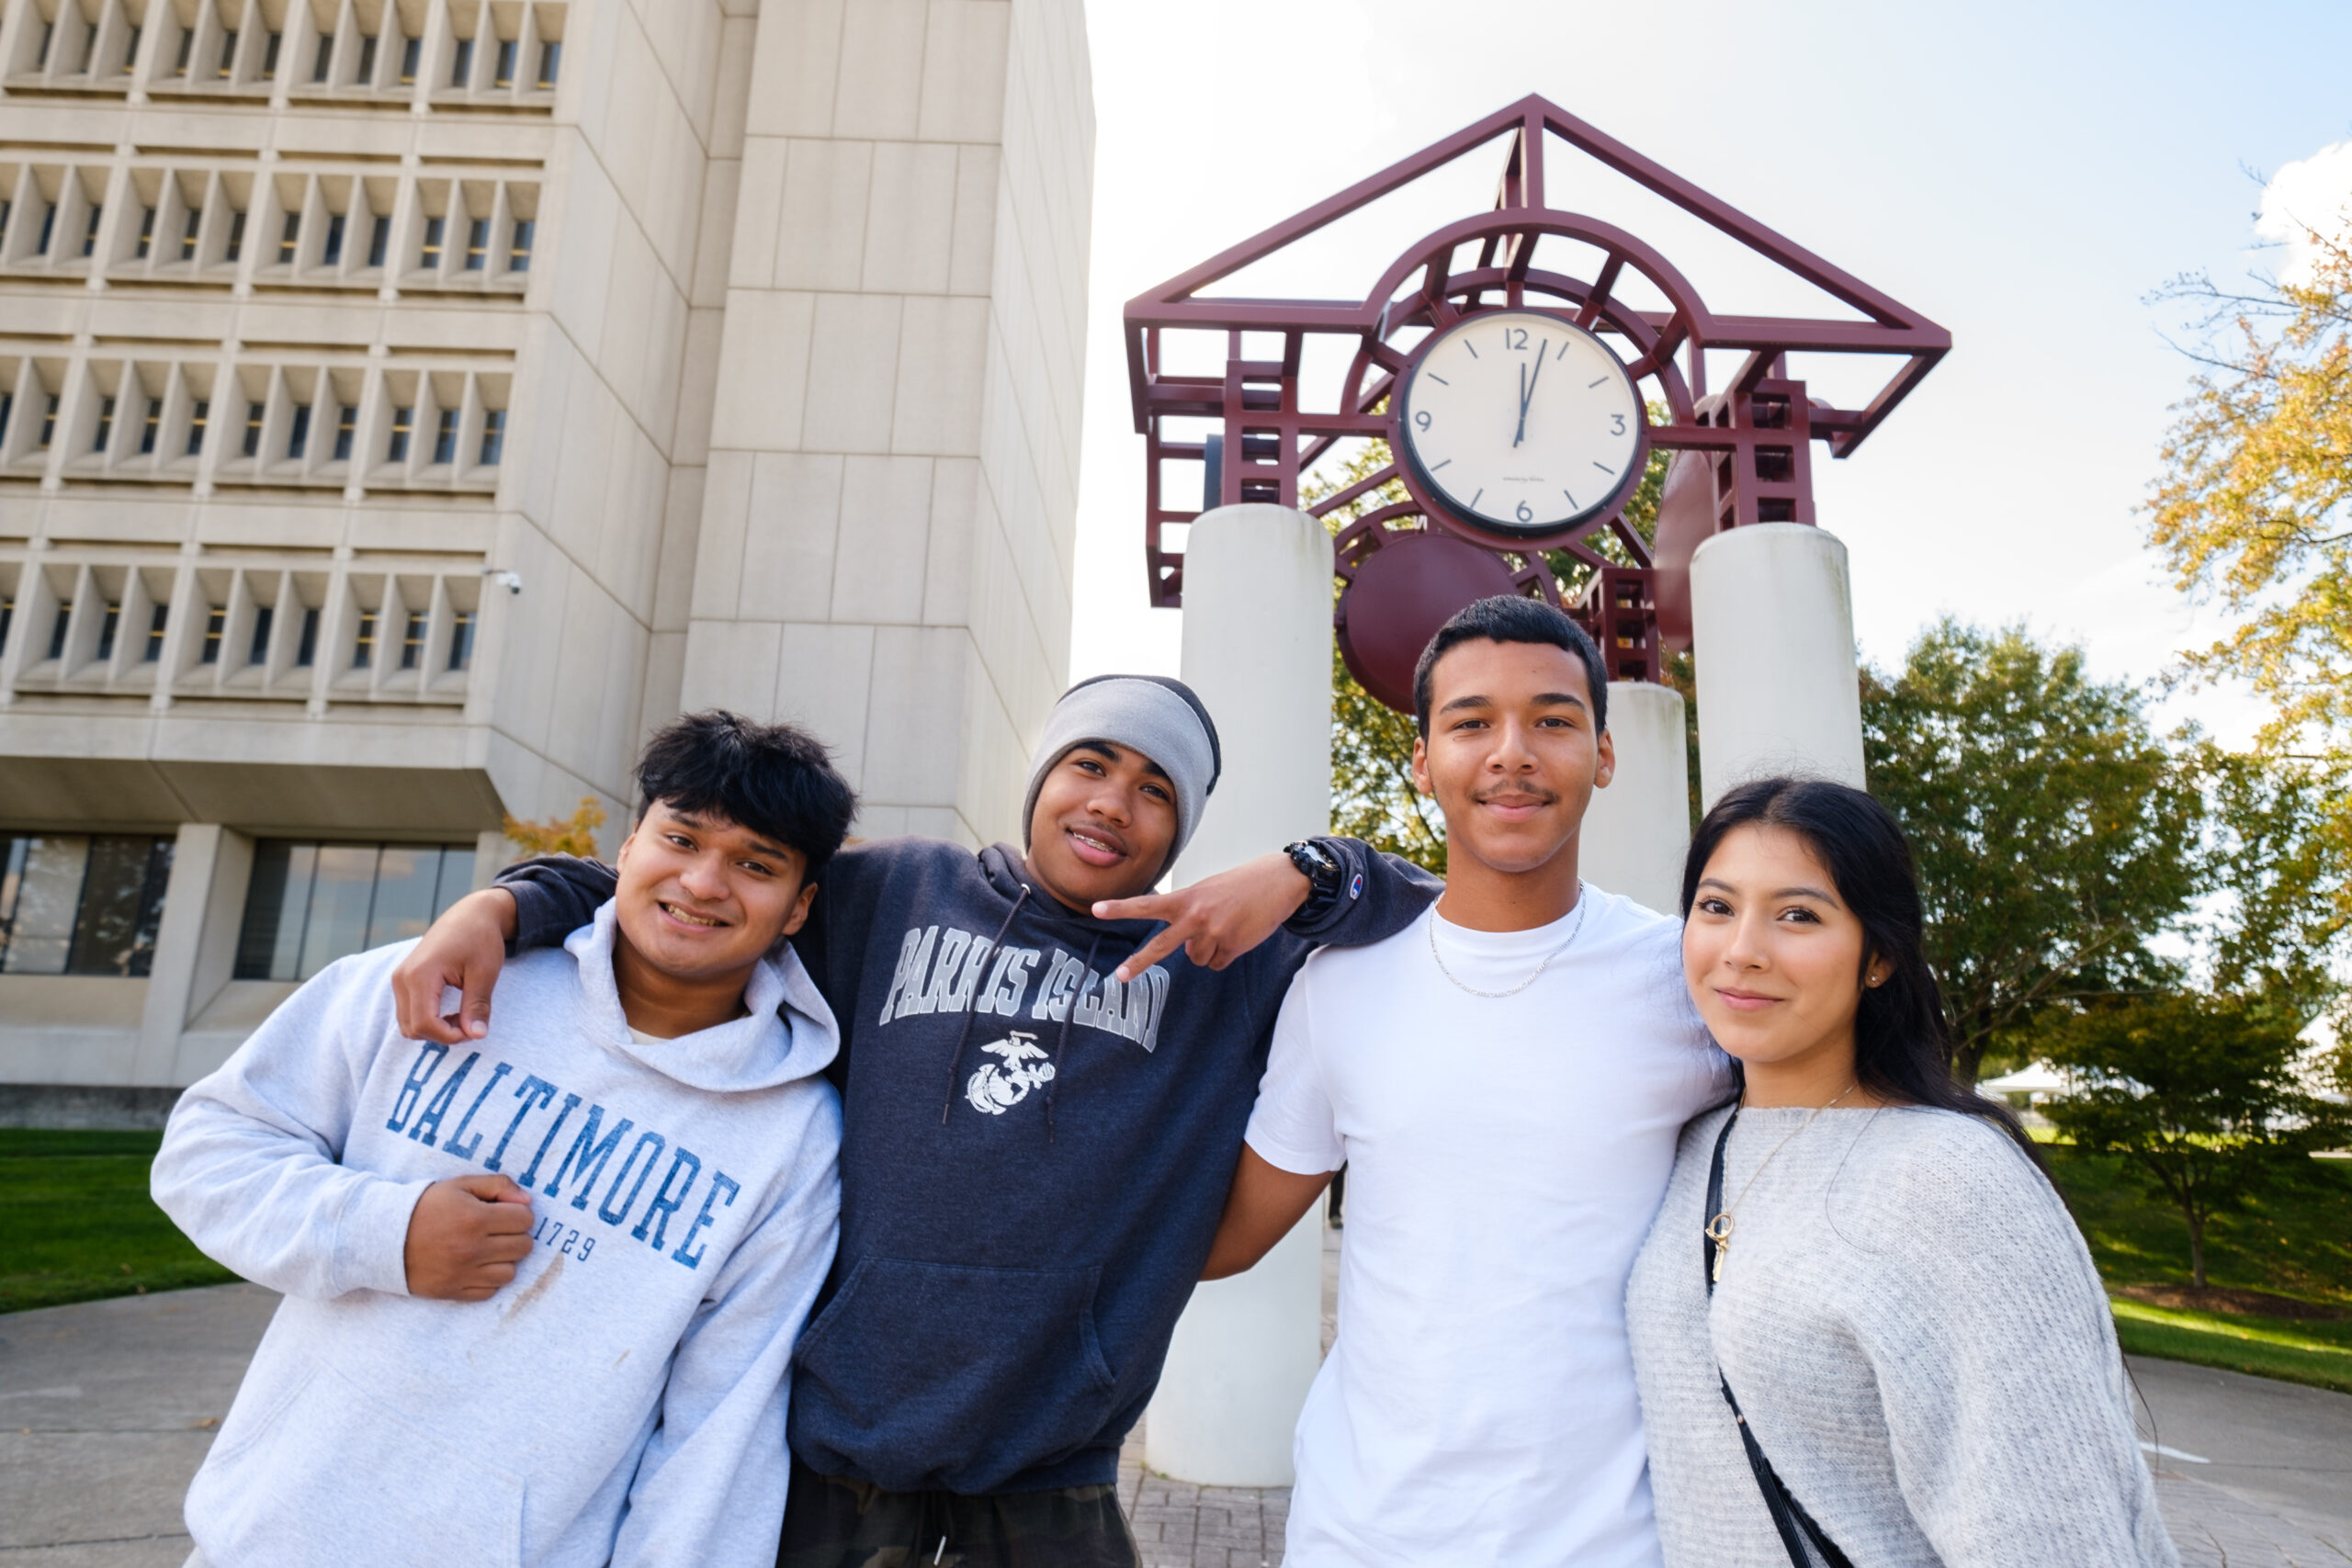 Friends pose together beside the UNCG clock tower.